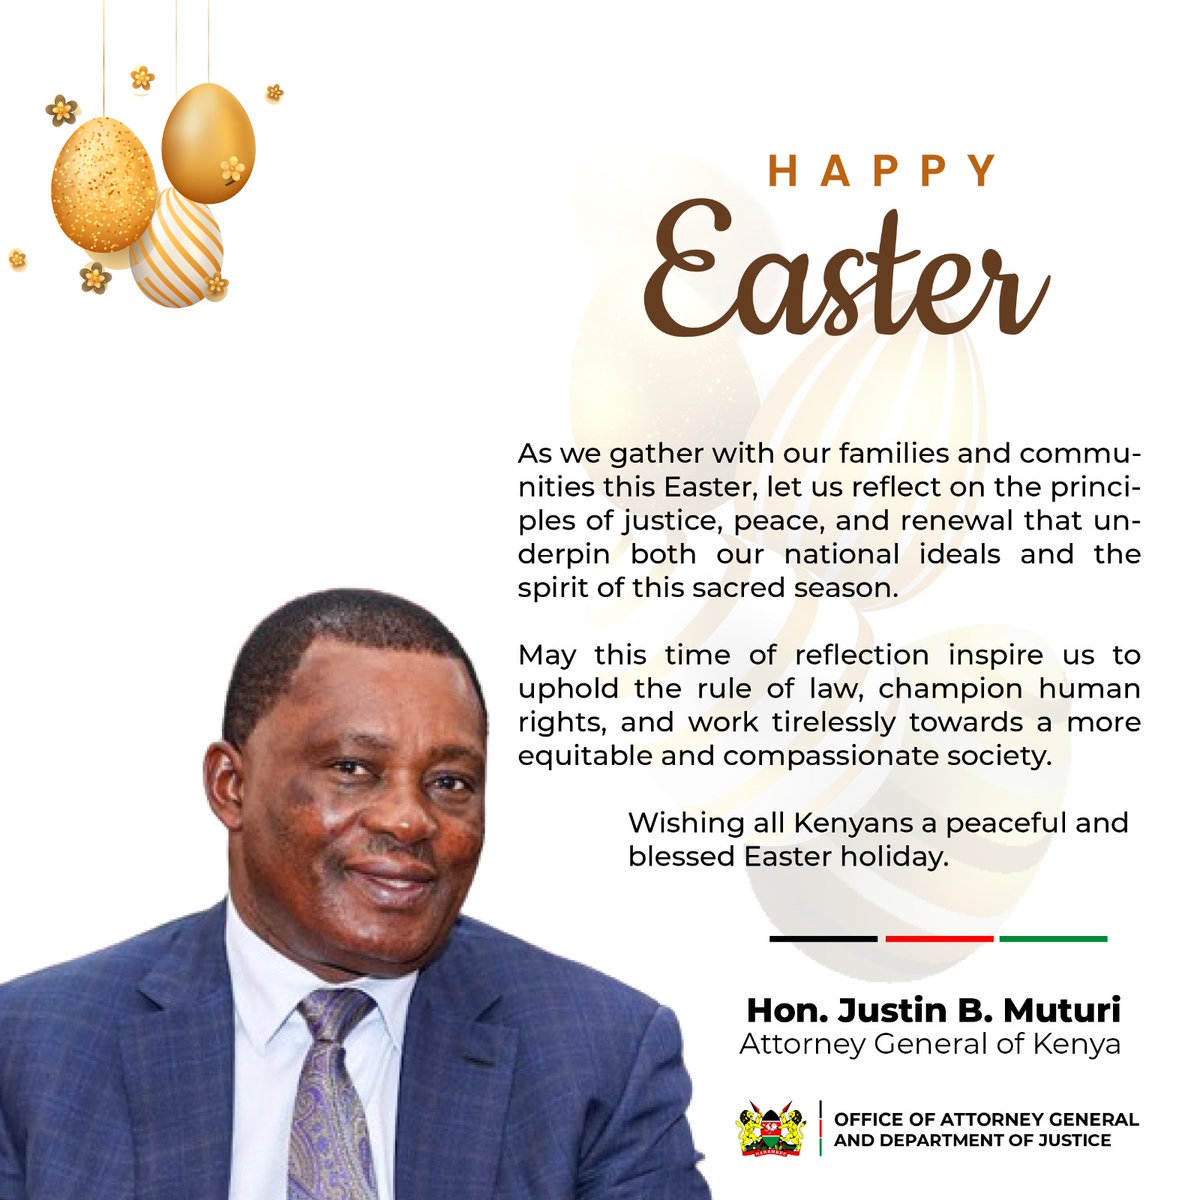 Wishing you and your family a joyful Easter celebration! 🎉 Happy Easter.